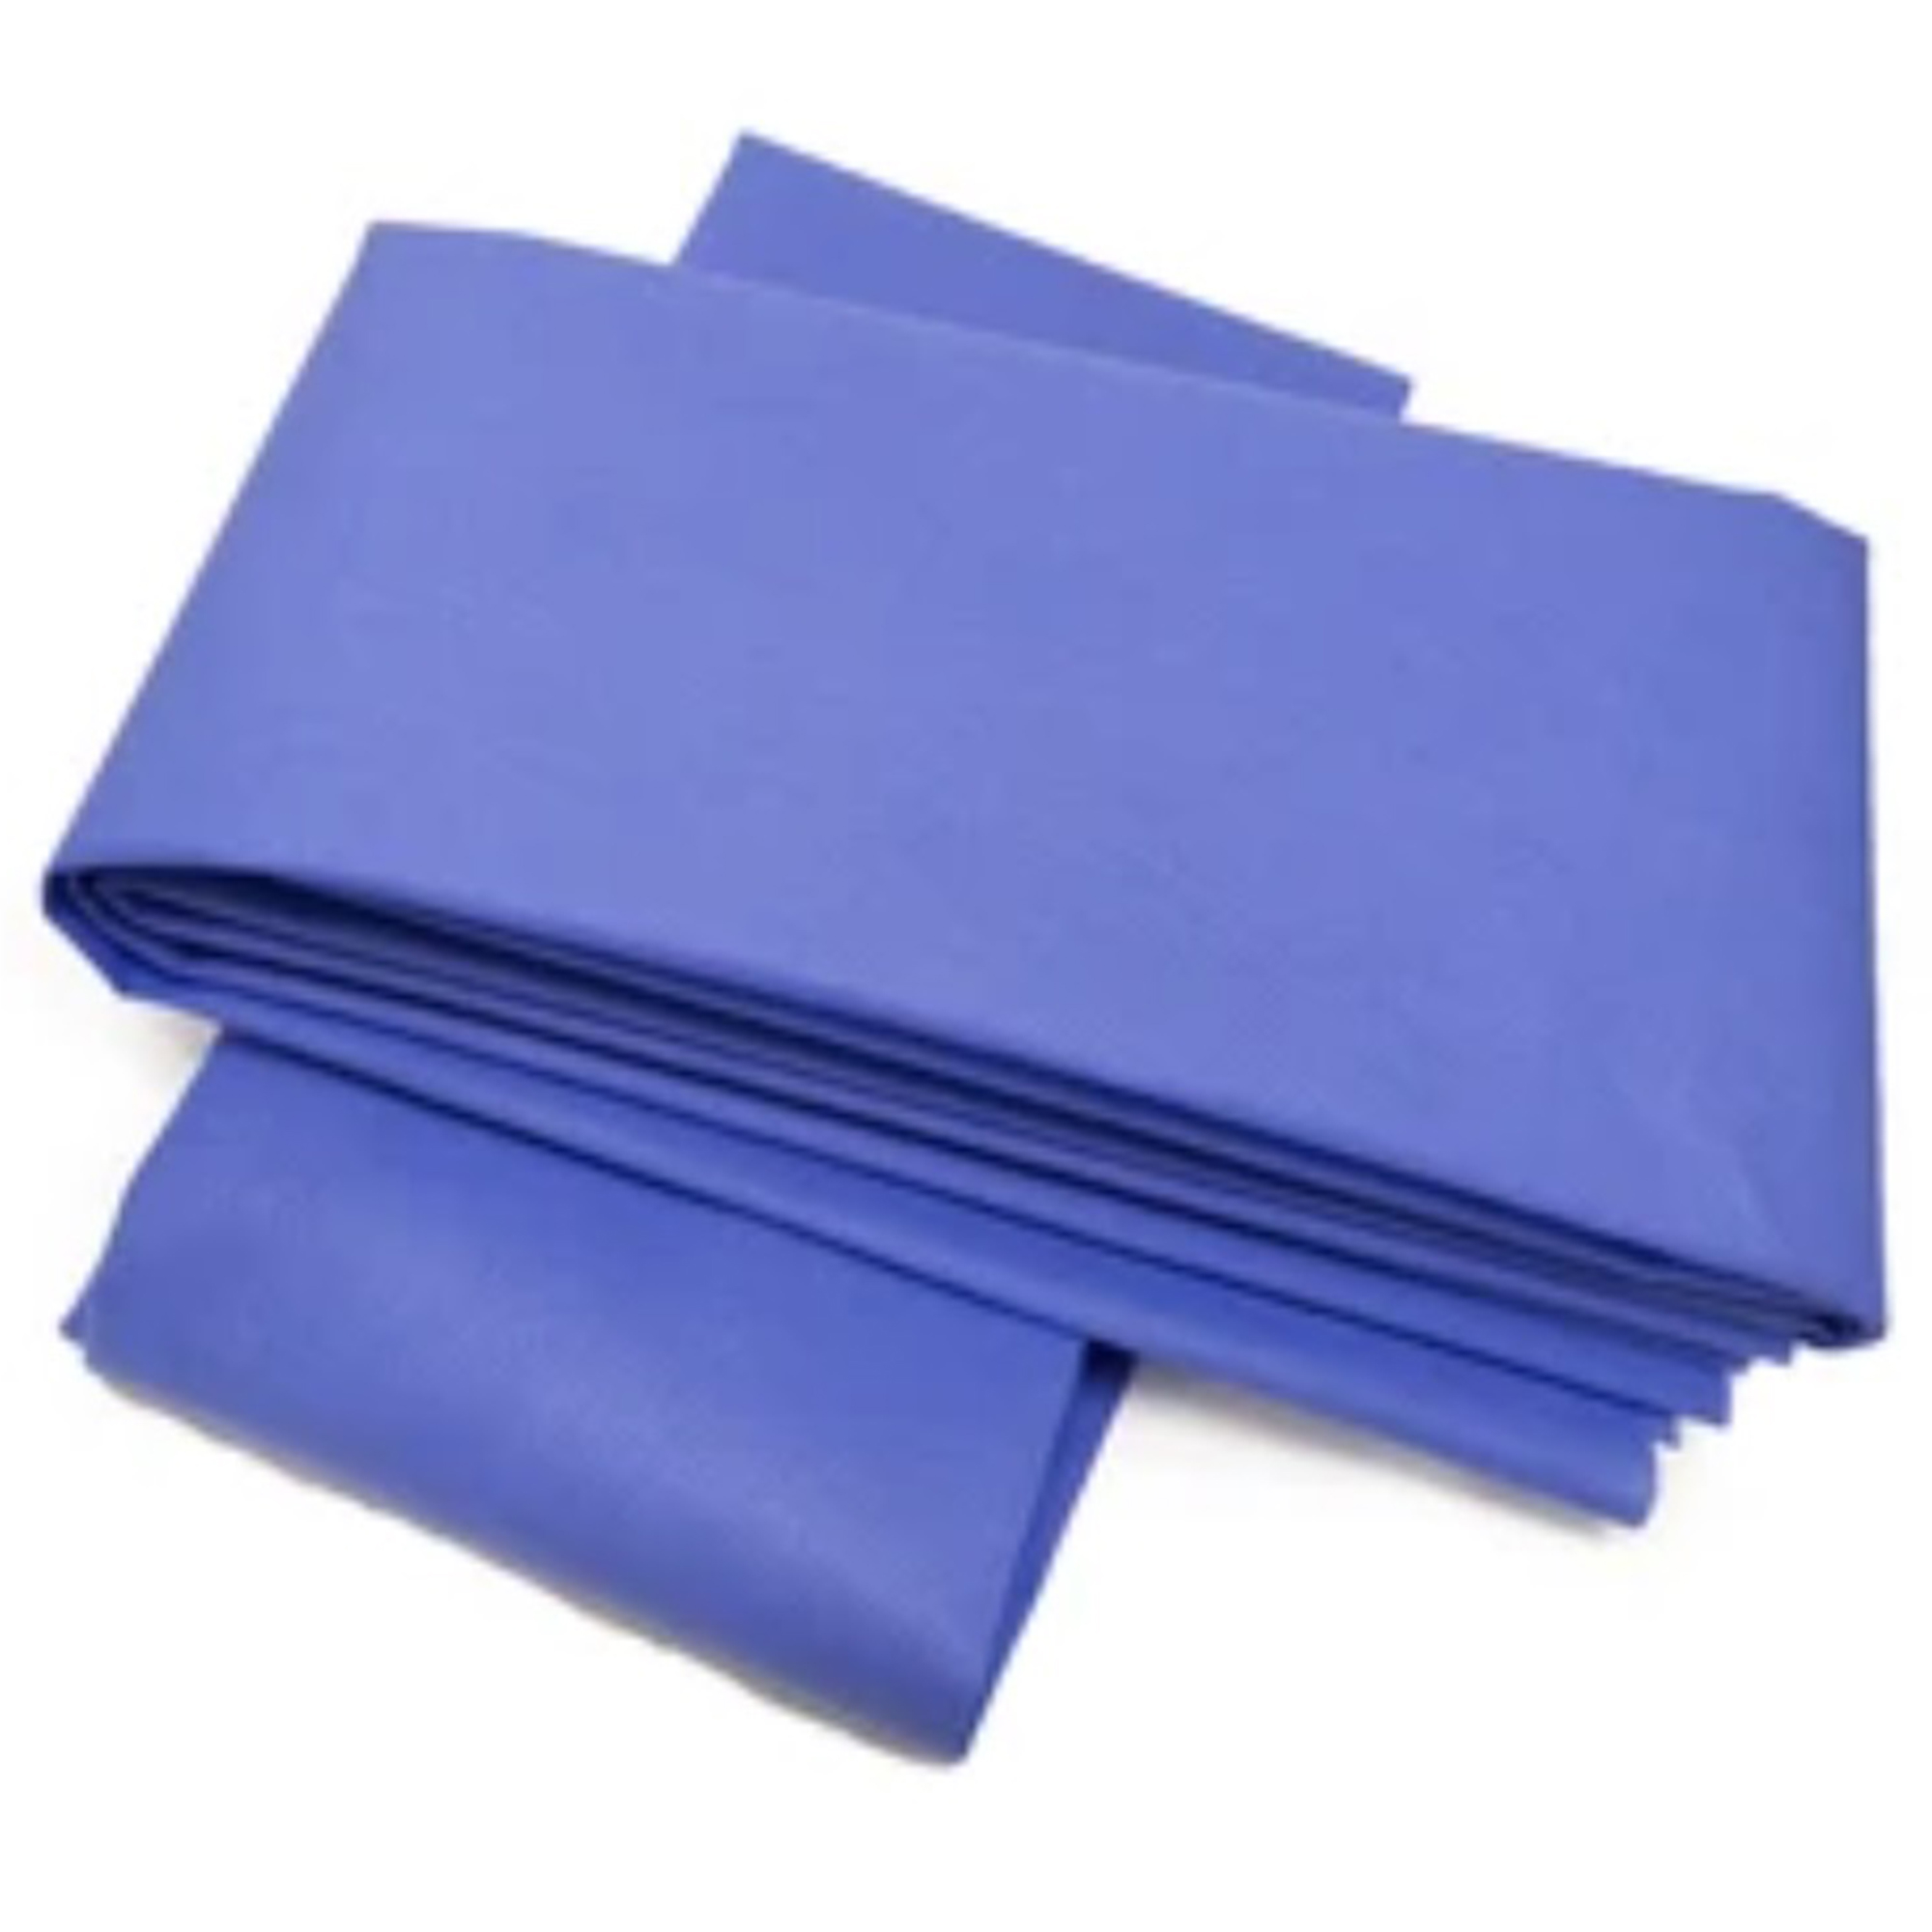 Dental Practice/STERILE SURGICAL DRAPES AND KITS/Sterile Surgical Drapes